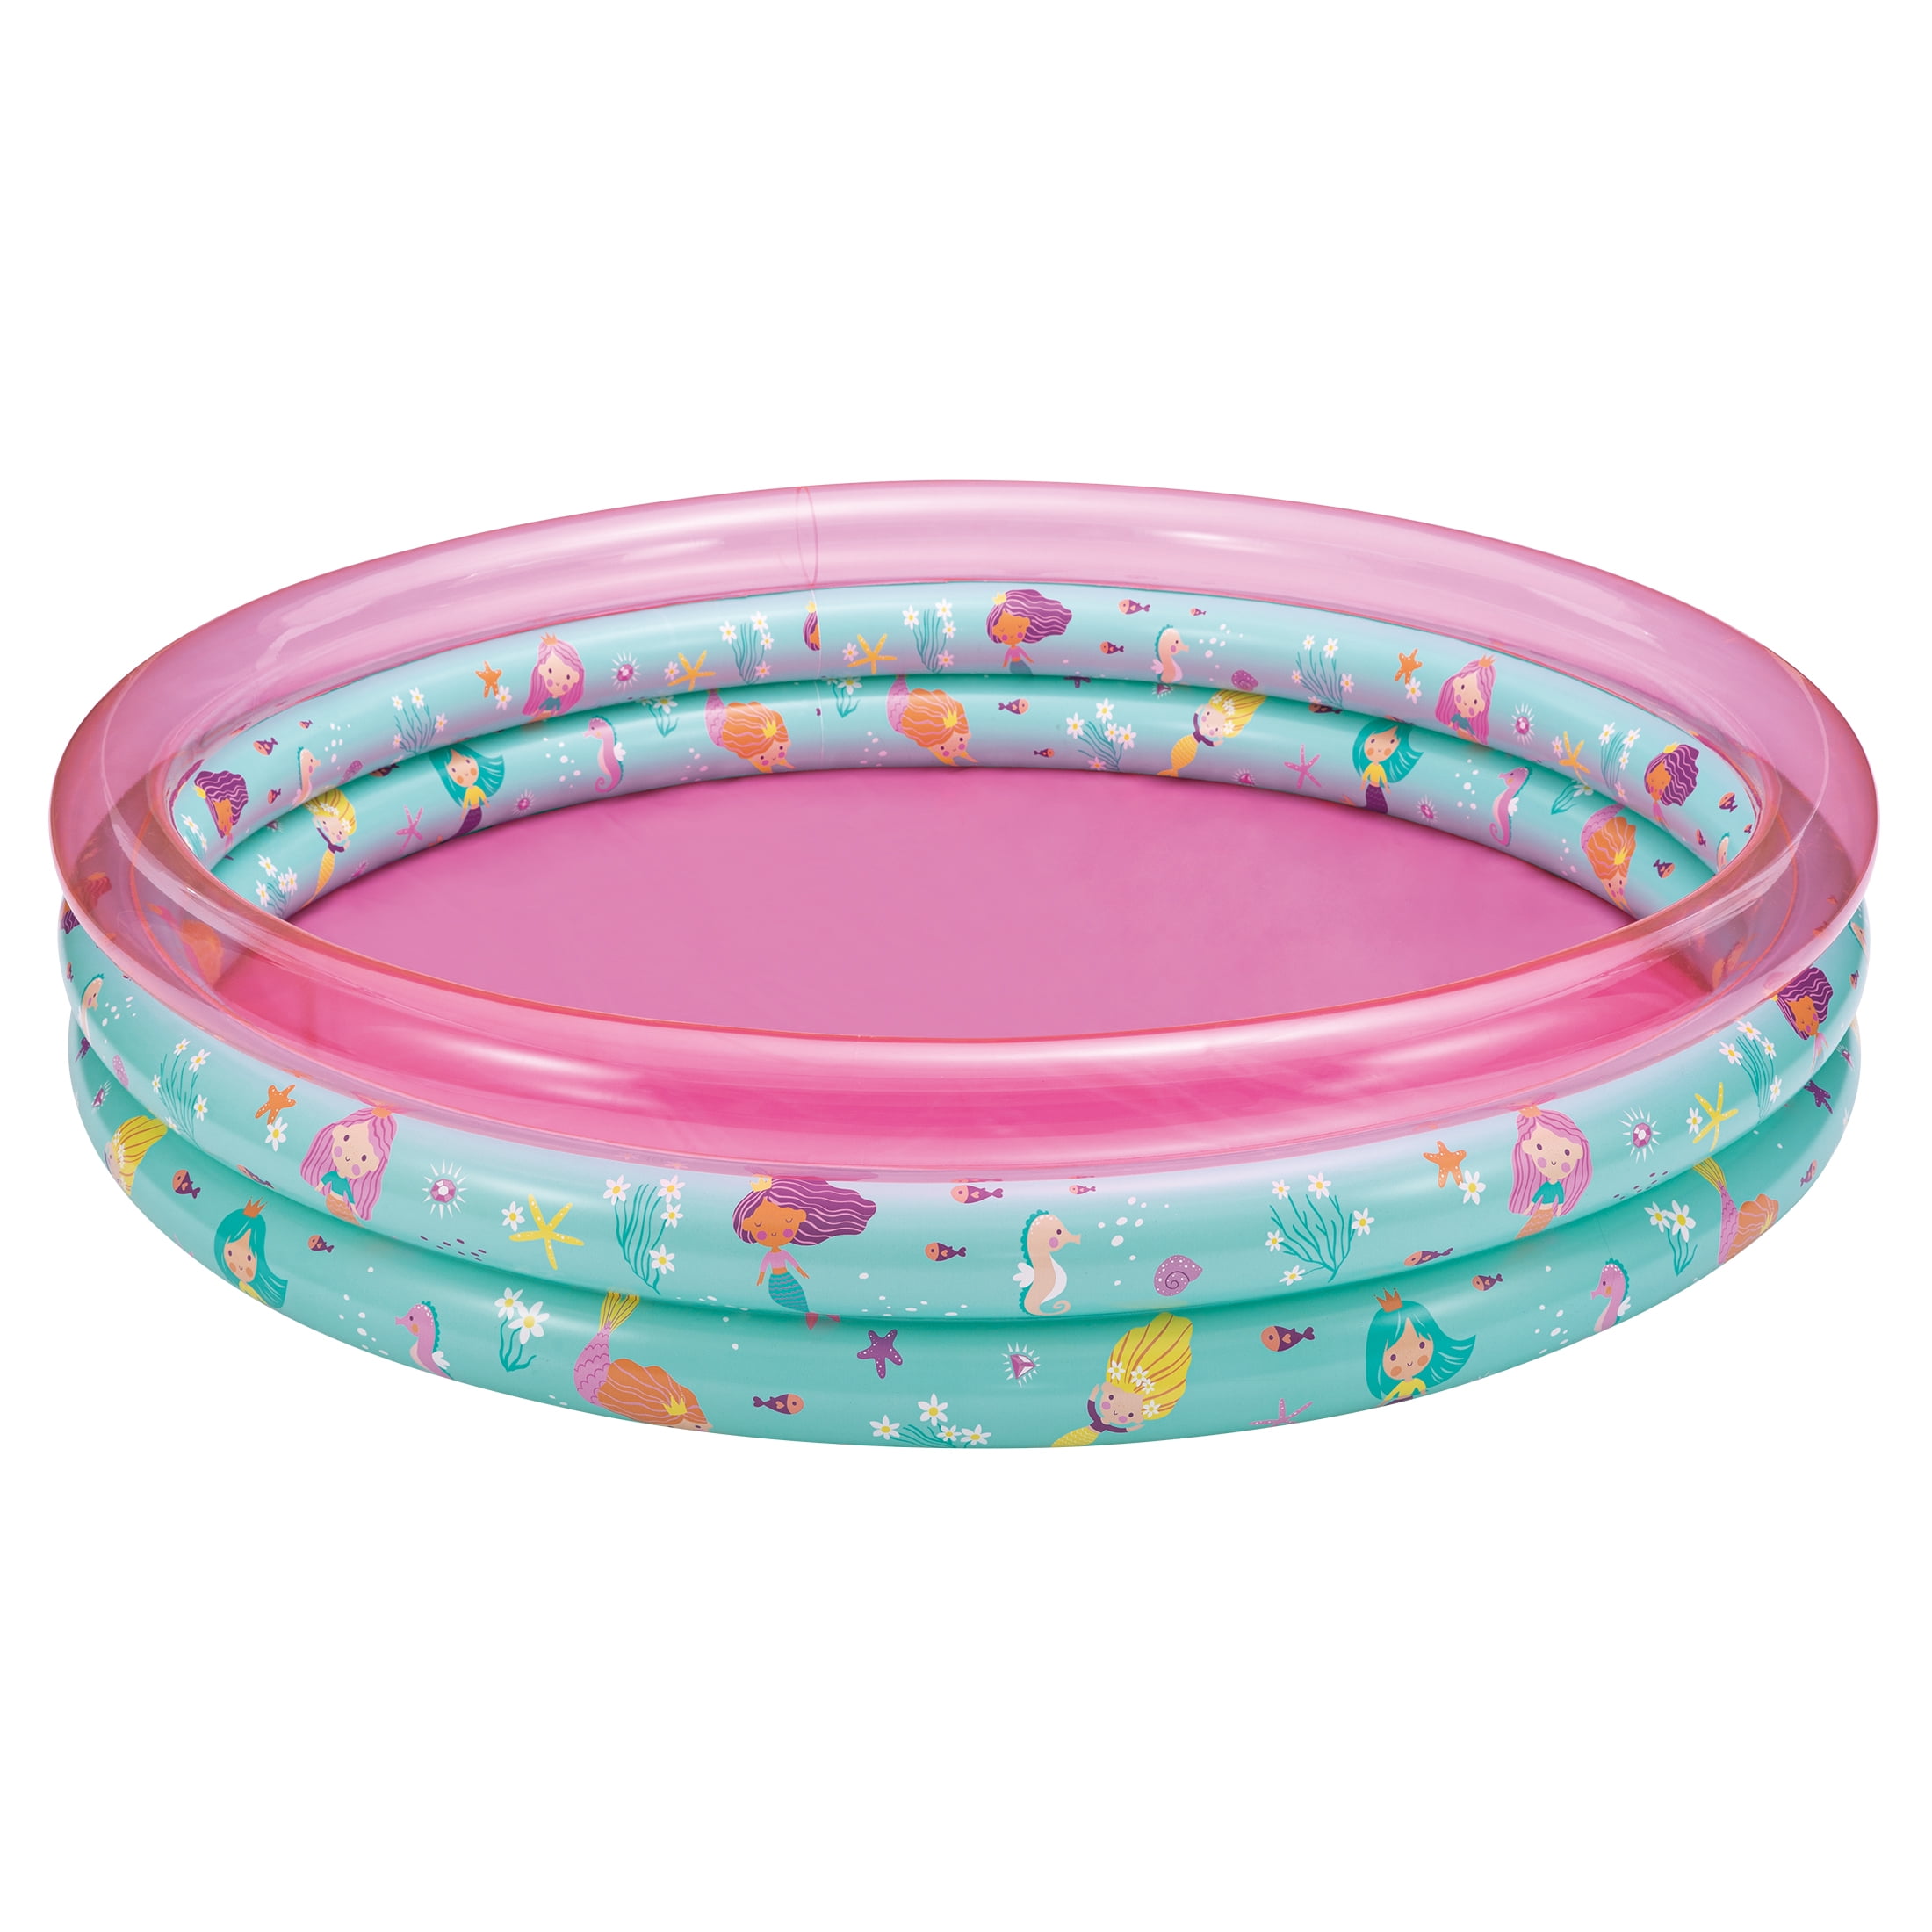 Bluescape Pink 3-Ring Inflatable Kids Pool, Age 2 & Up, Unisex